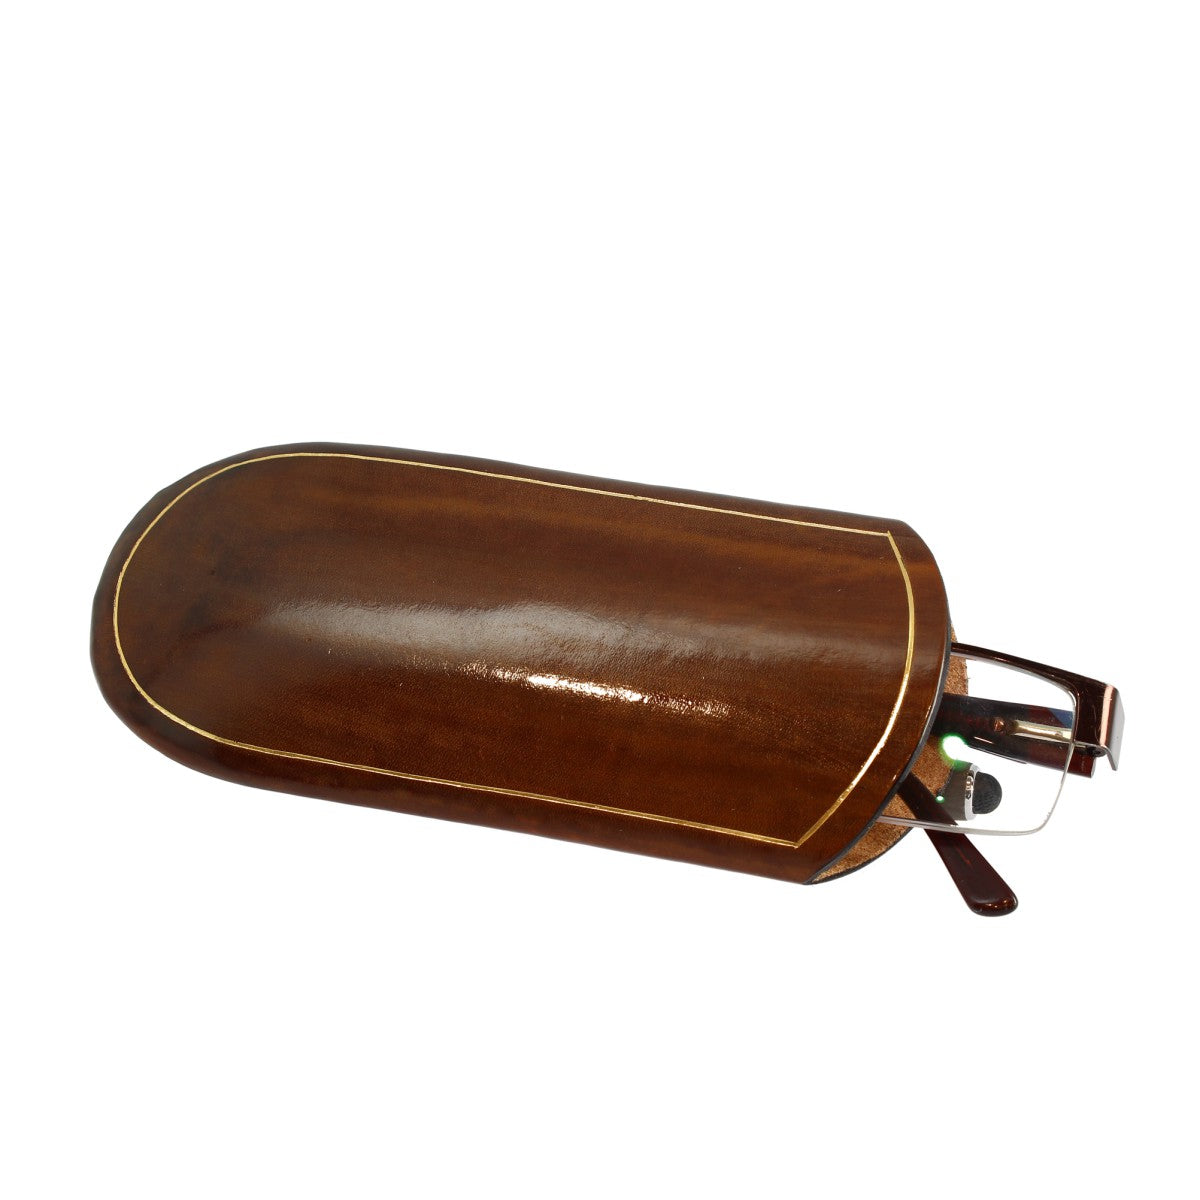 Medium pocket glasses case made of leather available in various colors